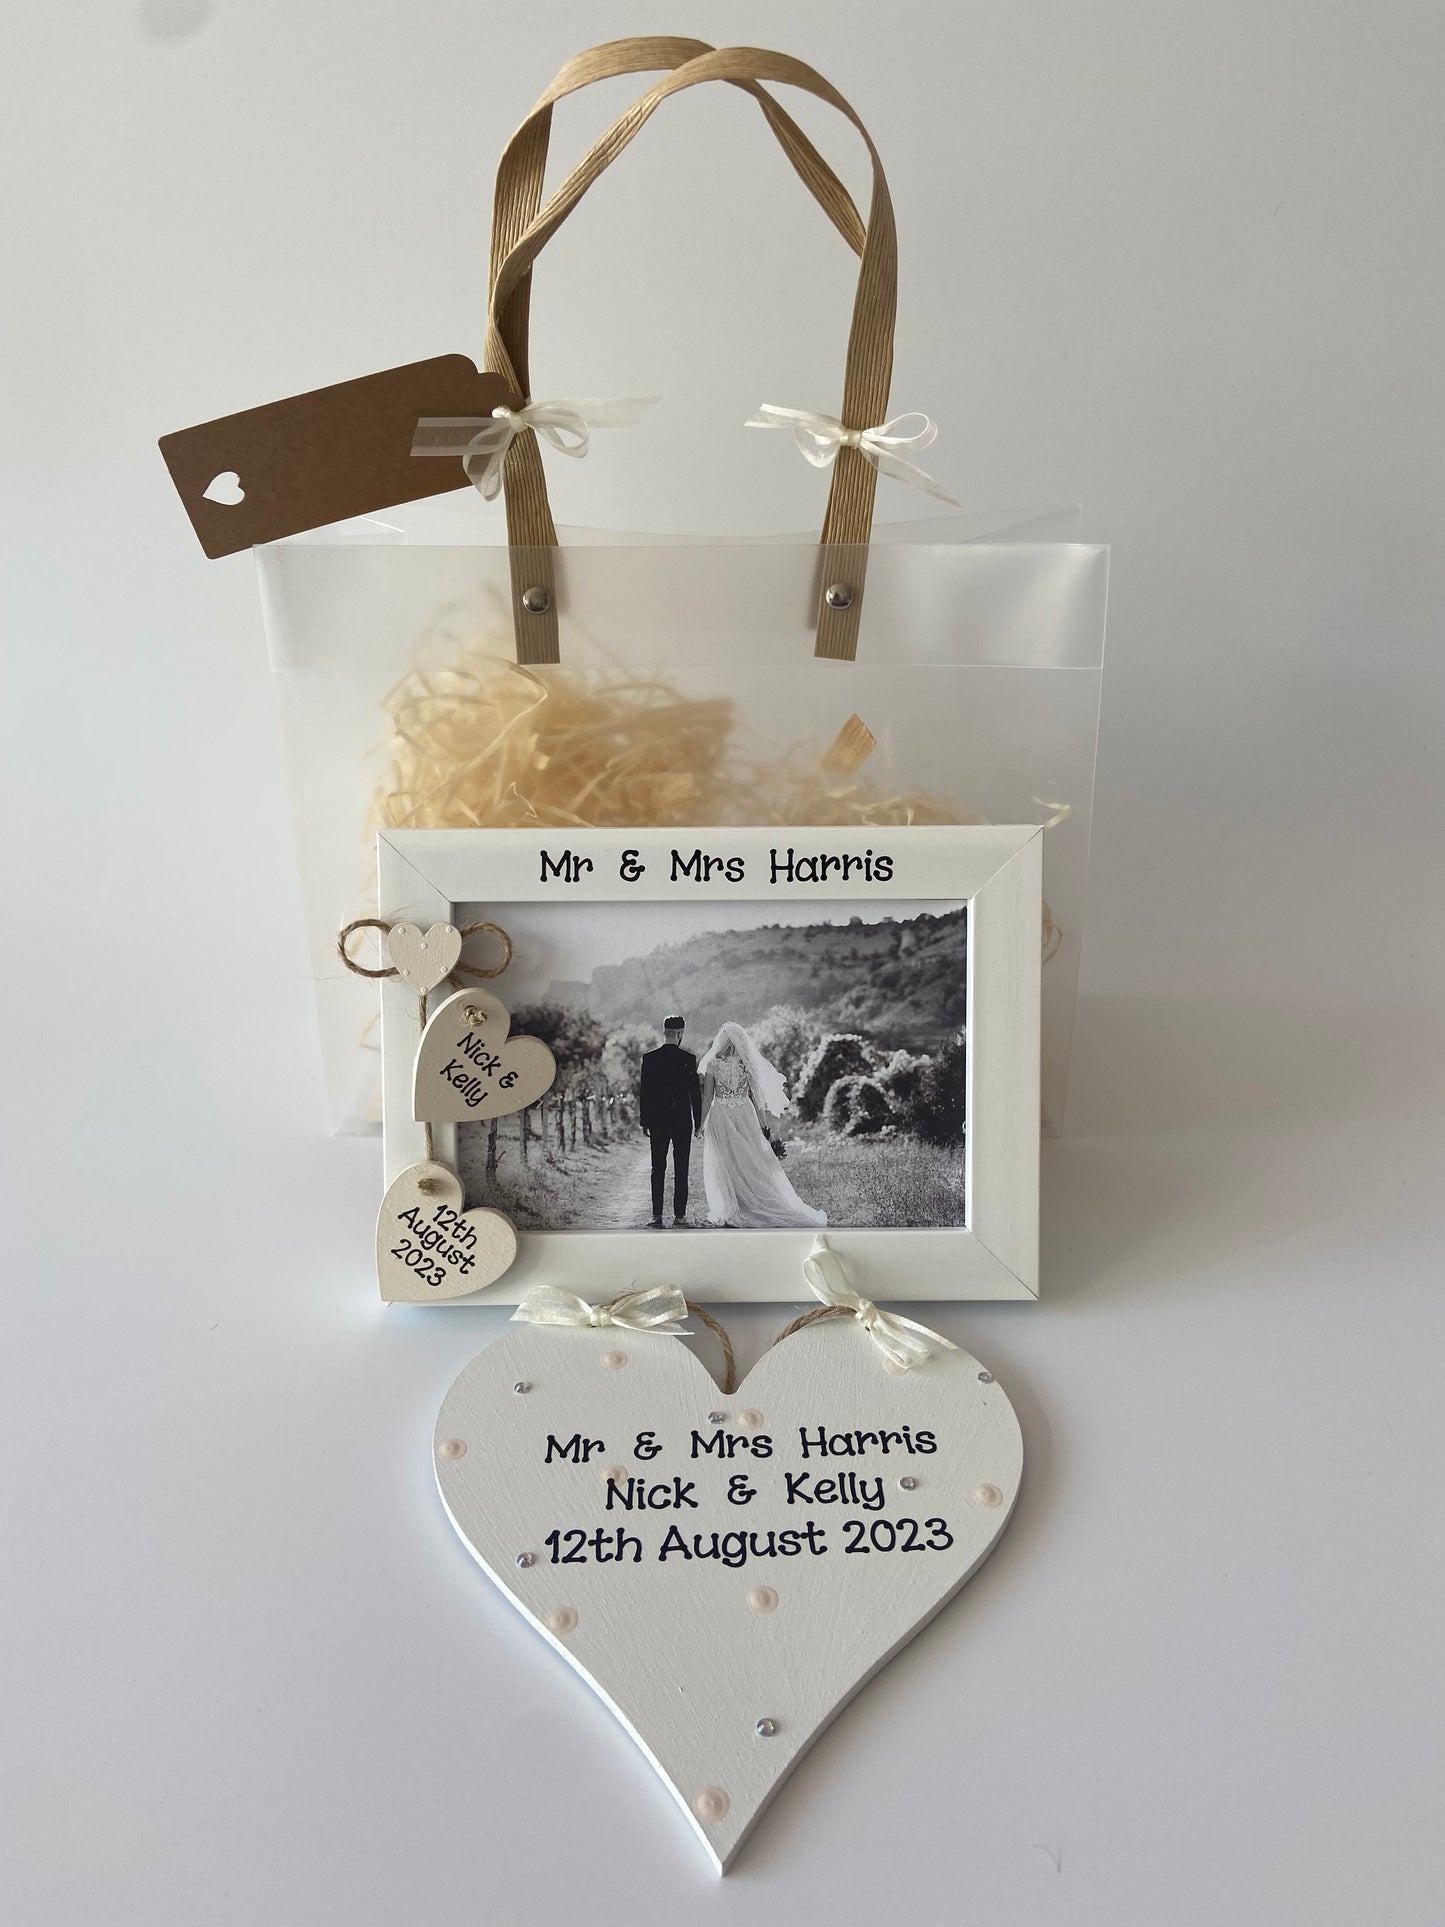 Image shows pairing gift set frame and plaque.